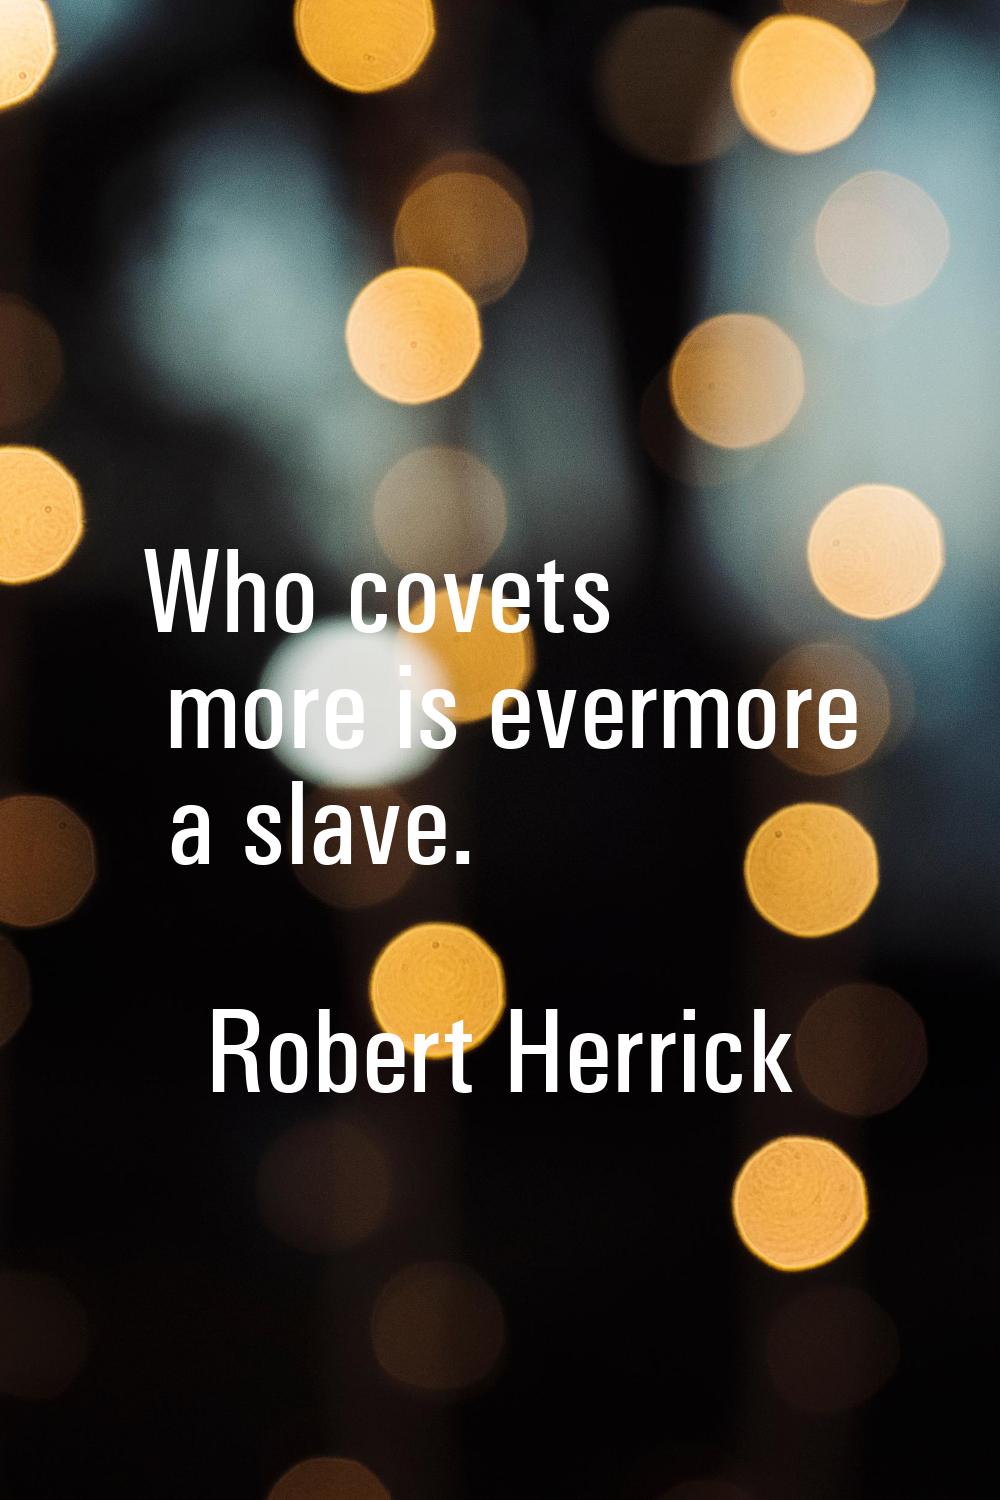 Who covets more is evermore a slave.